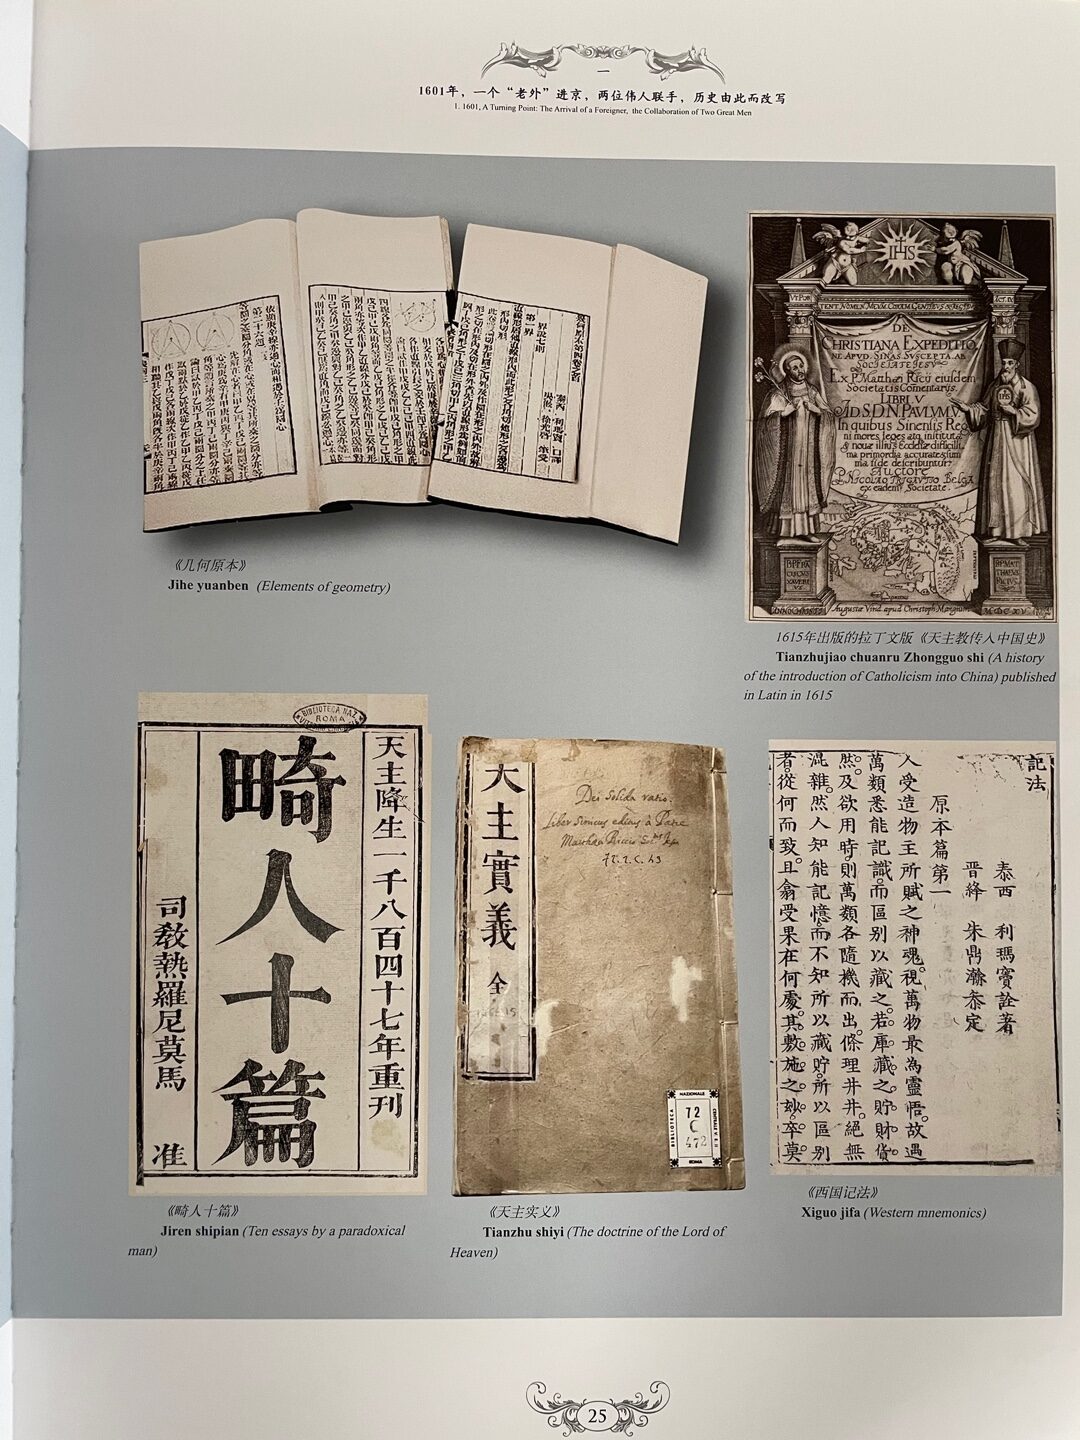 Exploring the Collections: Chinese textbooks published by Jesuit  missionaries in the 16th-17th C. - Harvard-Yenching Institute